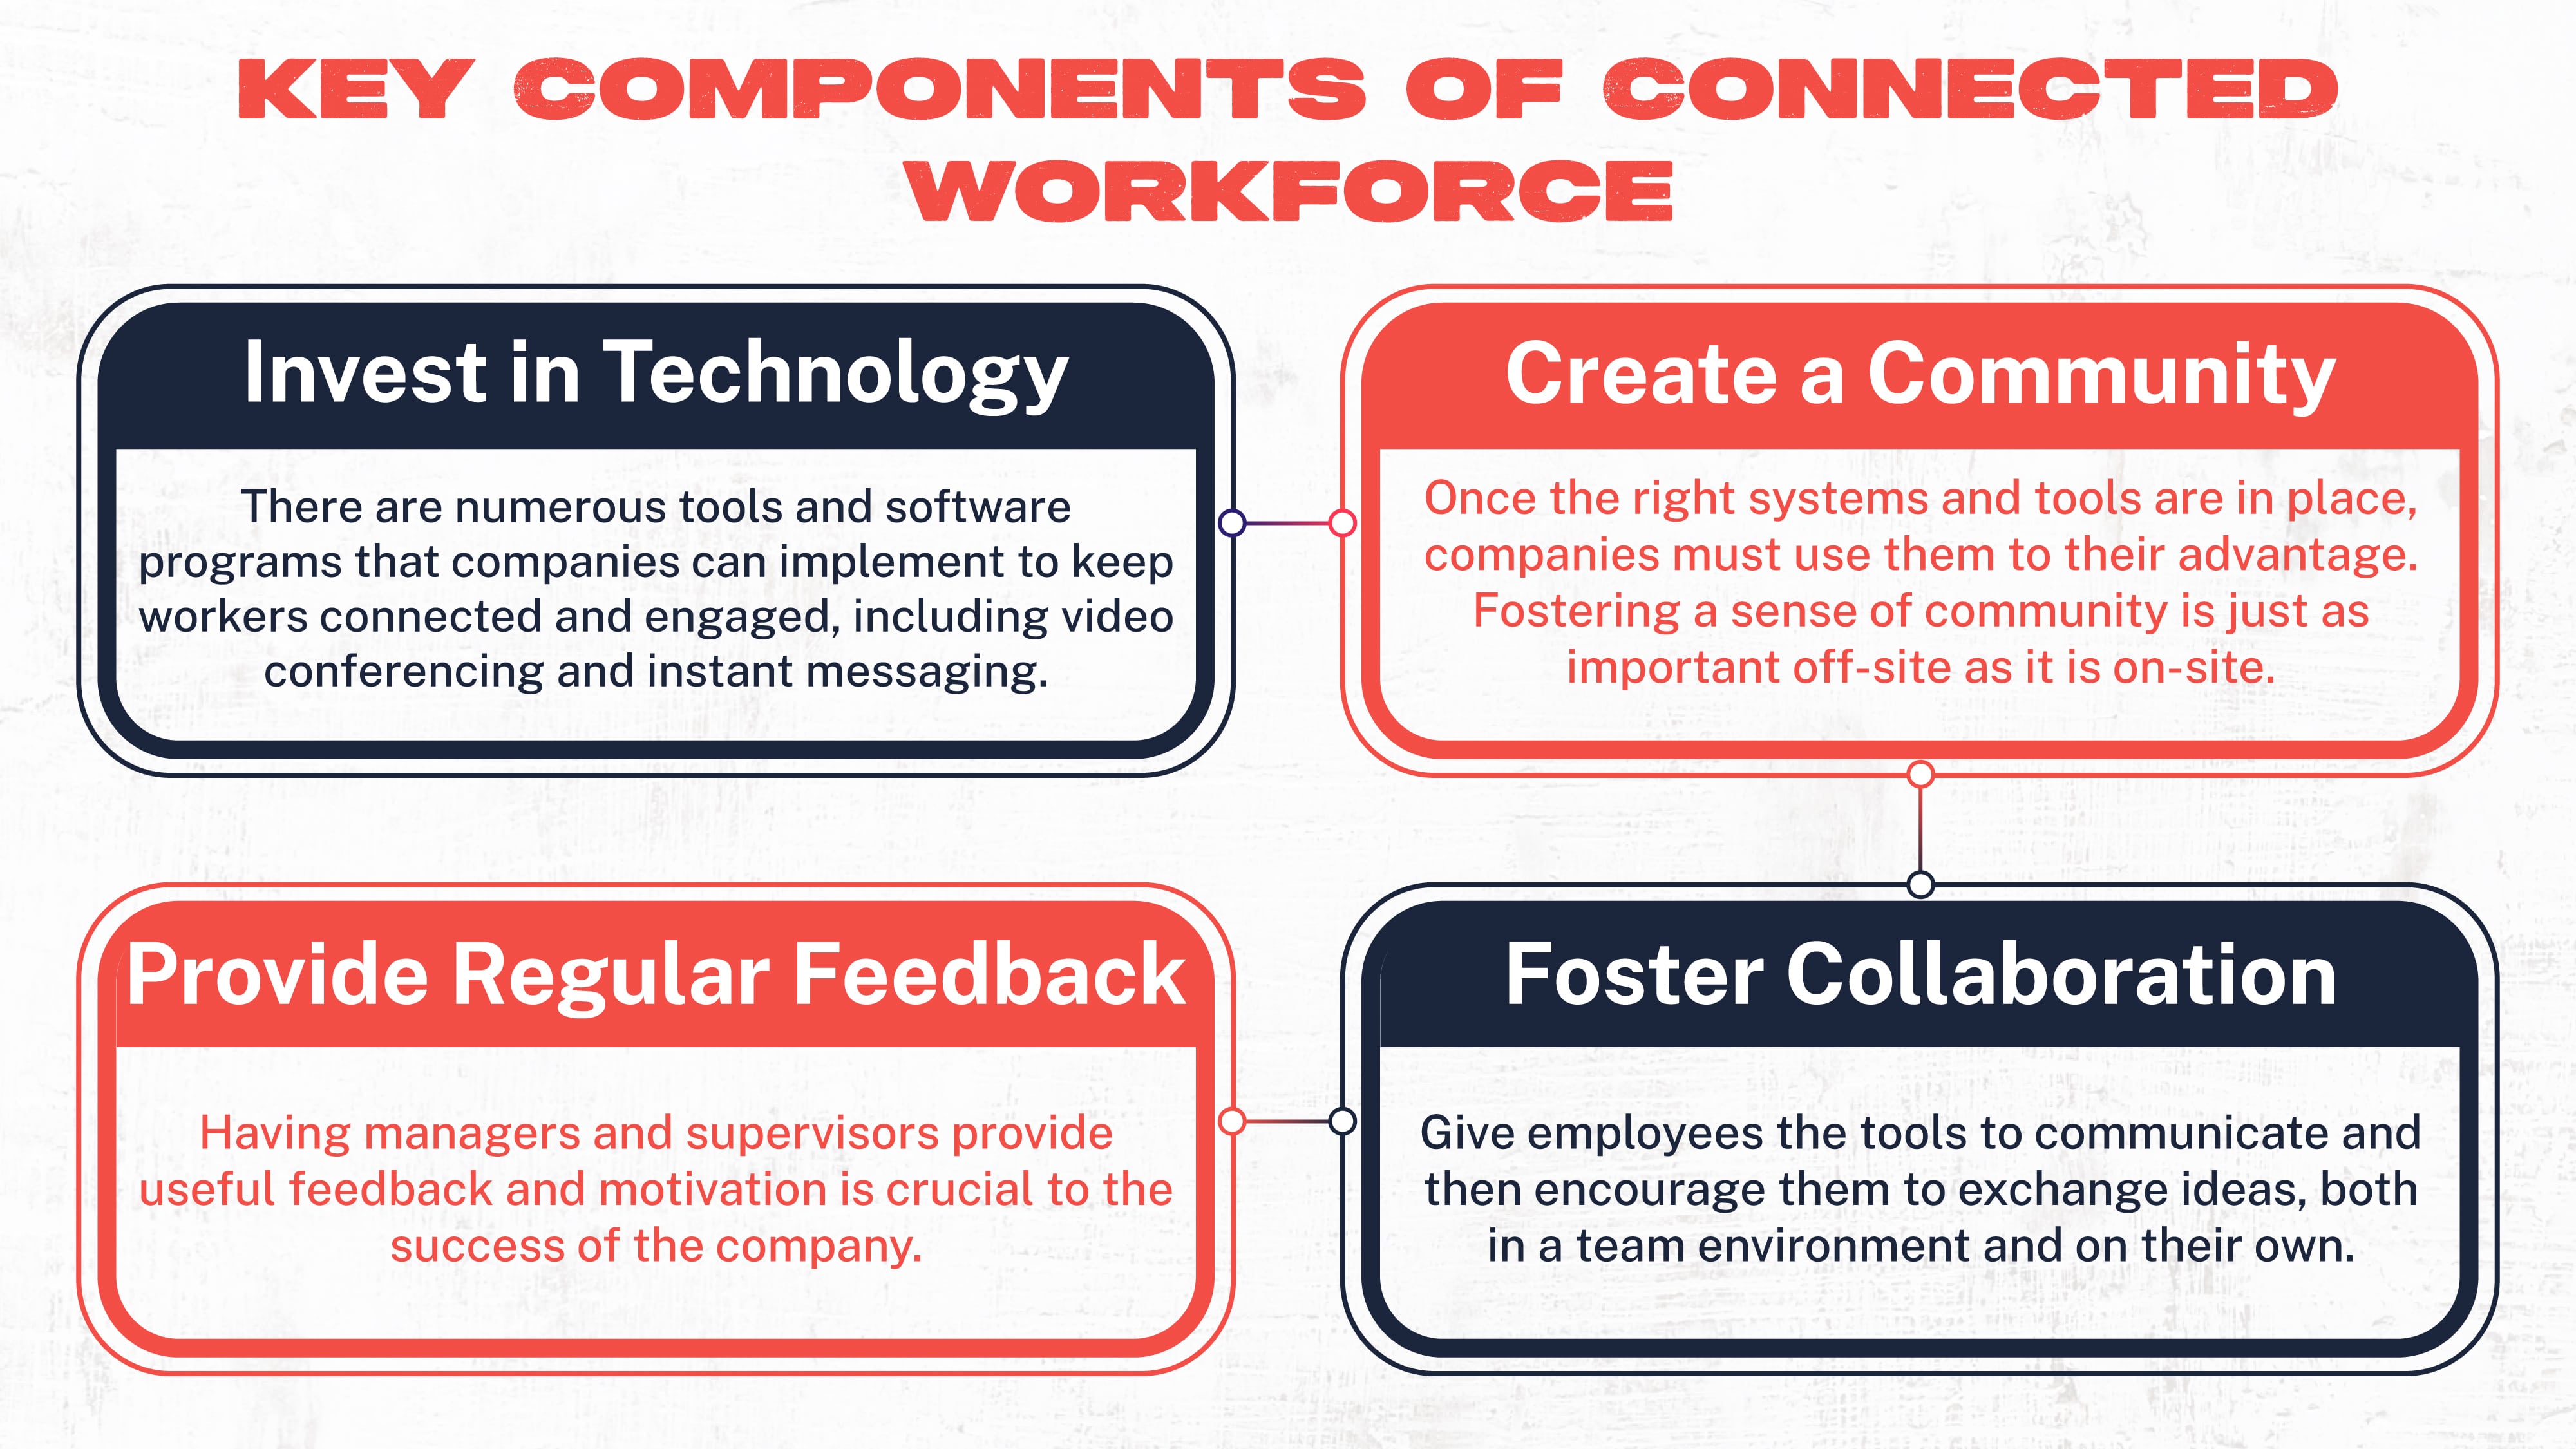 Key Components of Connected Workforce